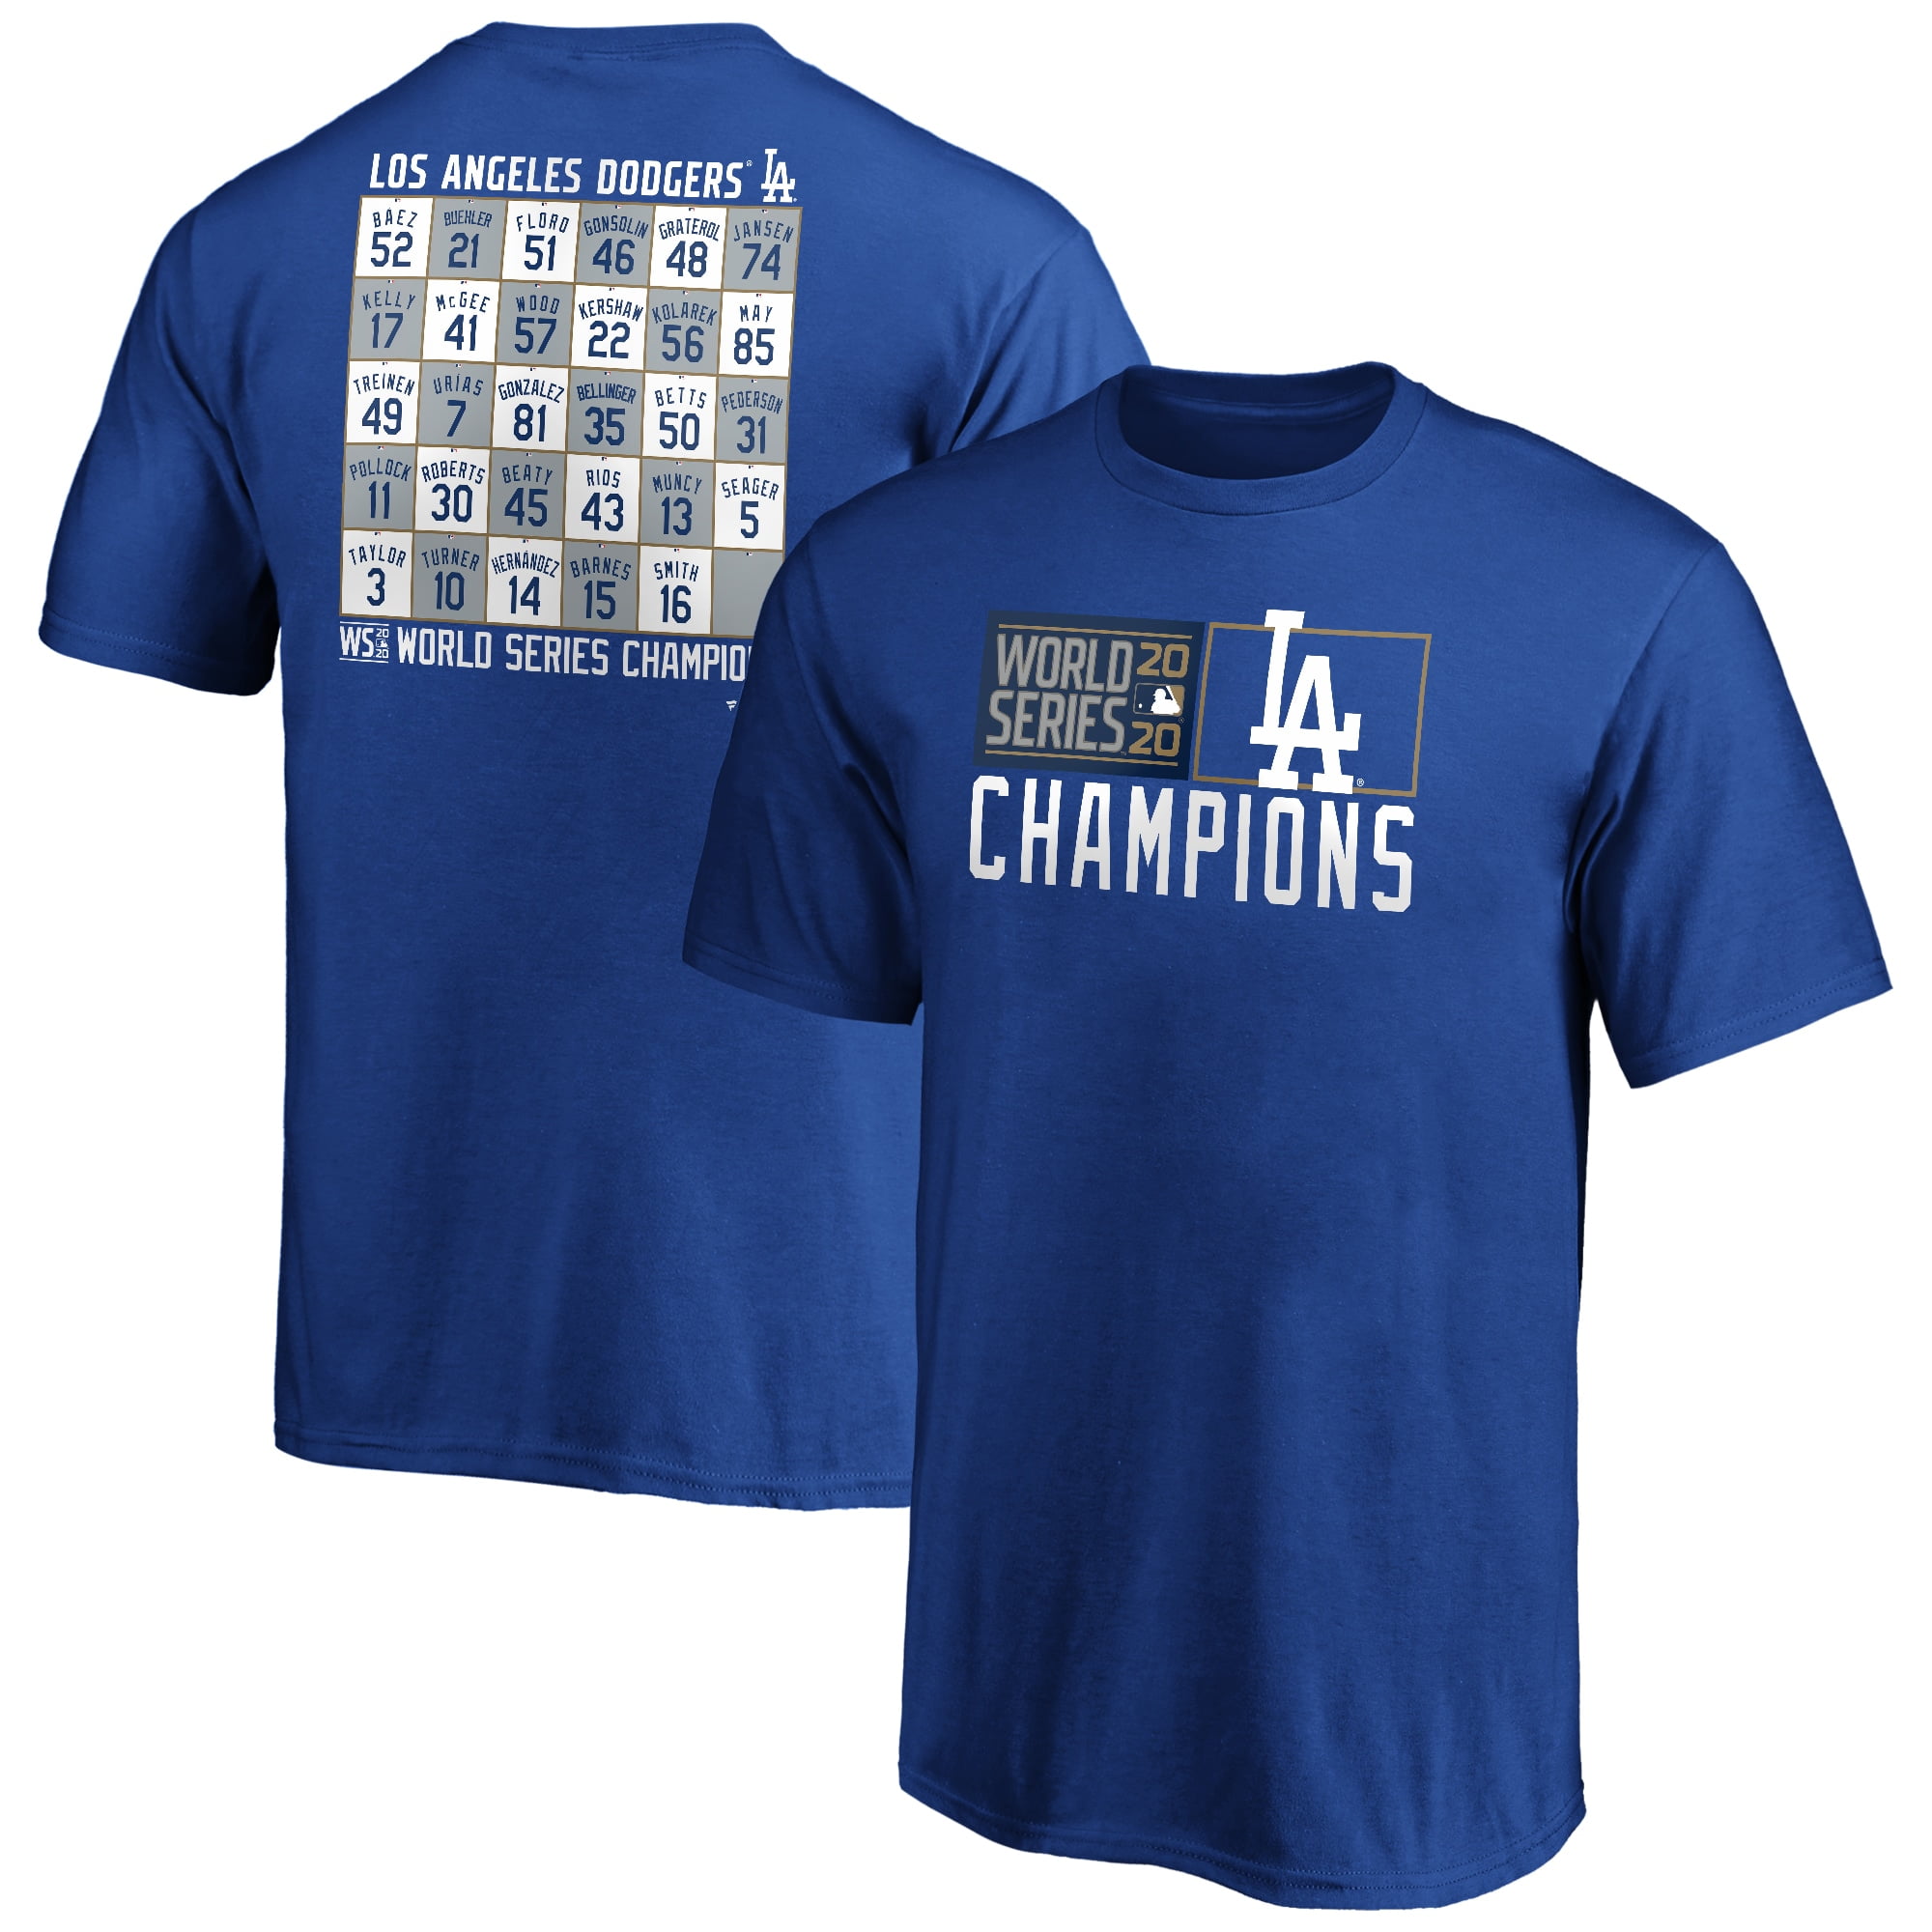 Los Angeles Dodgers Fanatics Branded Youth 2020 World Series Champions